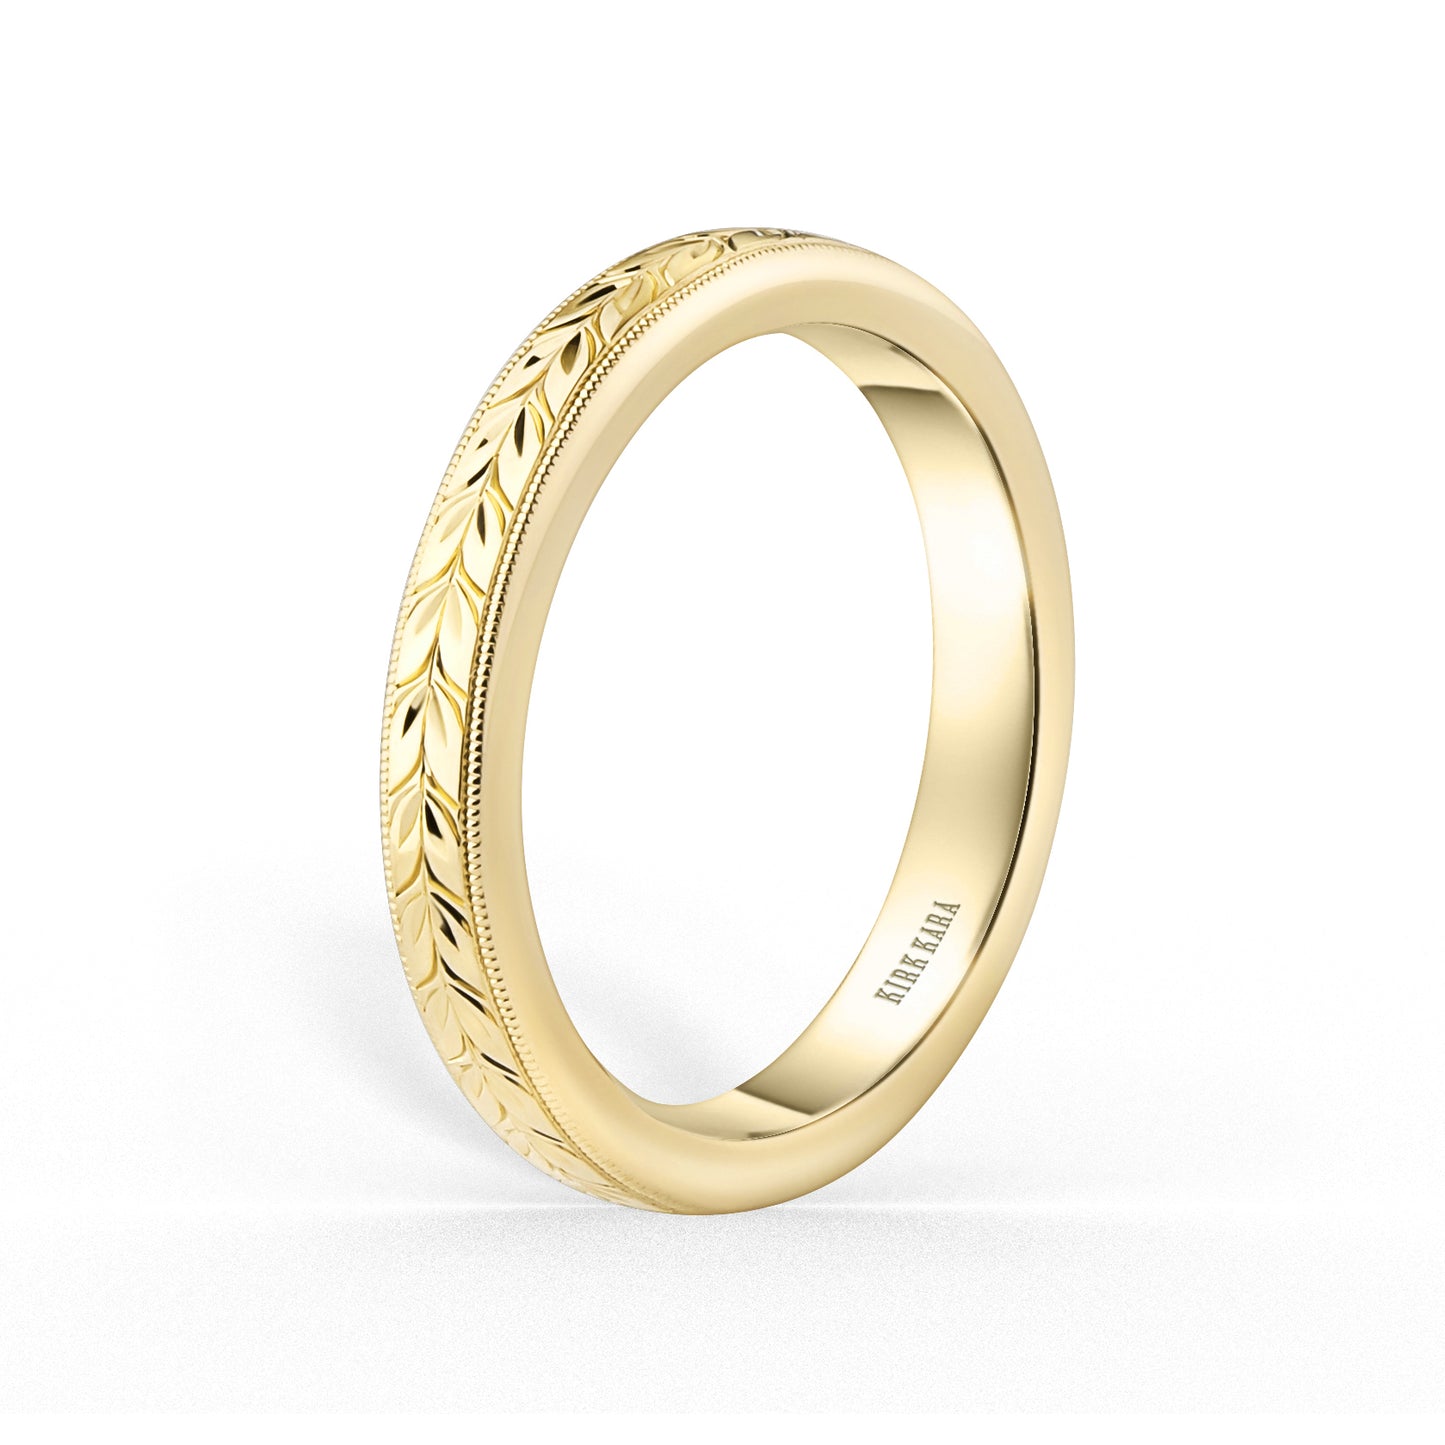 Thin Floral Engraved Wedding Band, 3mm